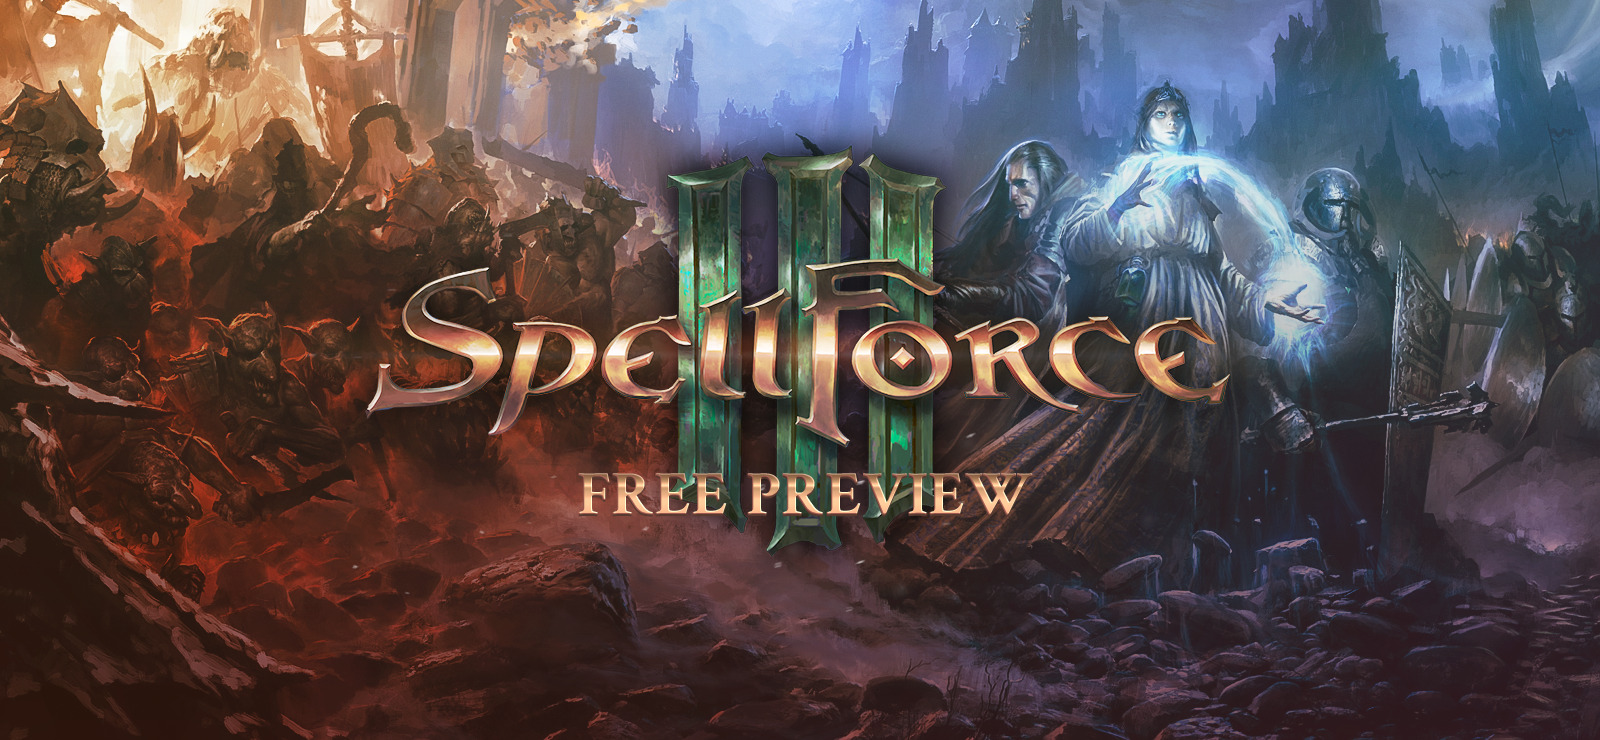 SpellForce: Conquest of Eo free downloads